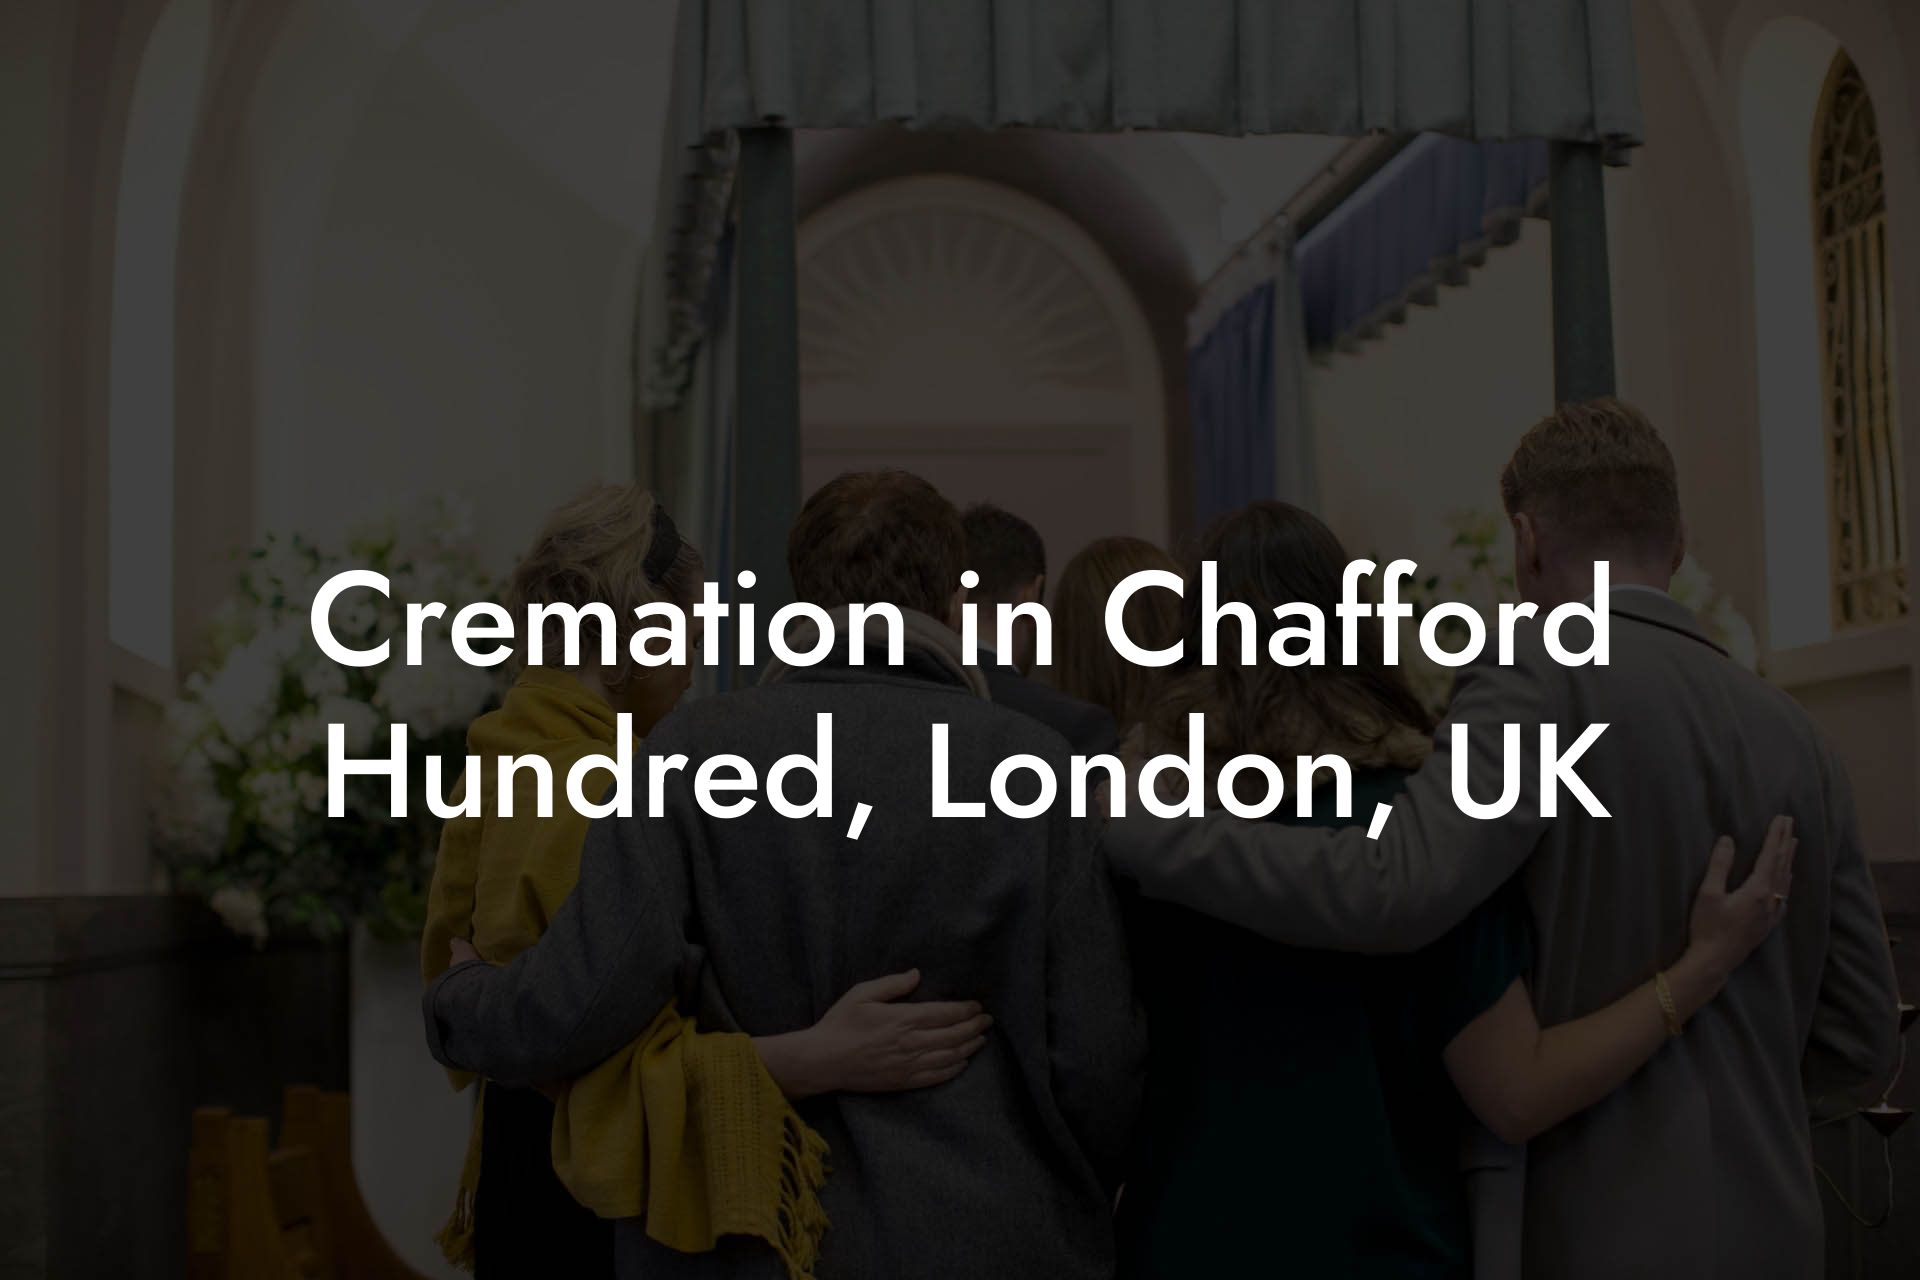 Cremation in Chafford Hundred, London, UK